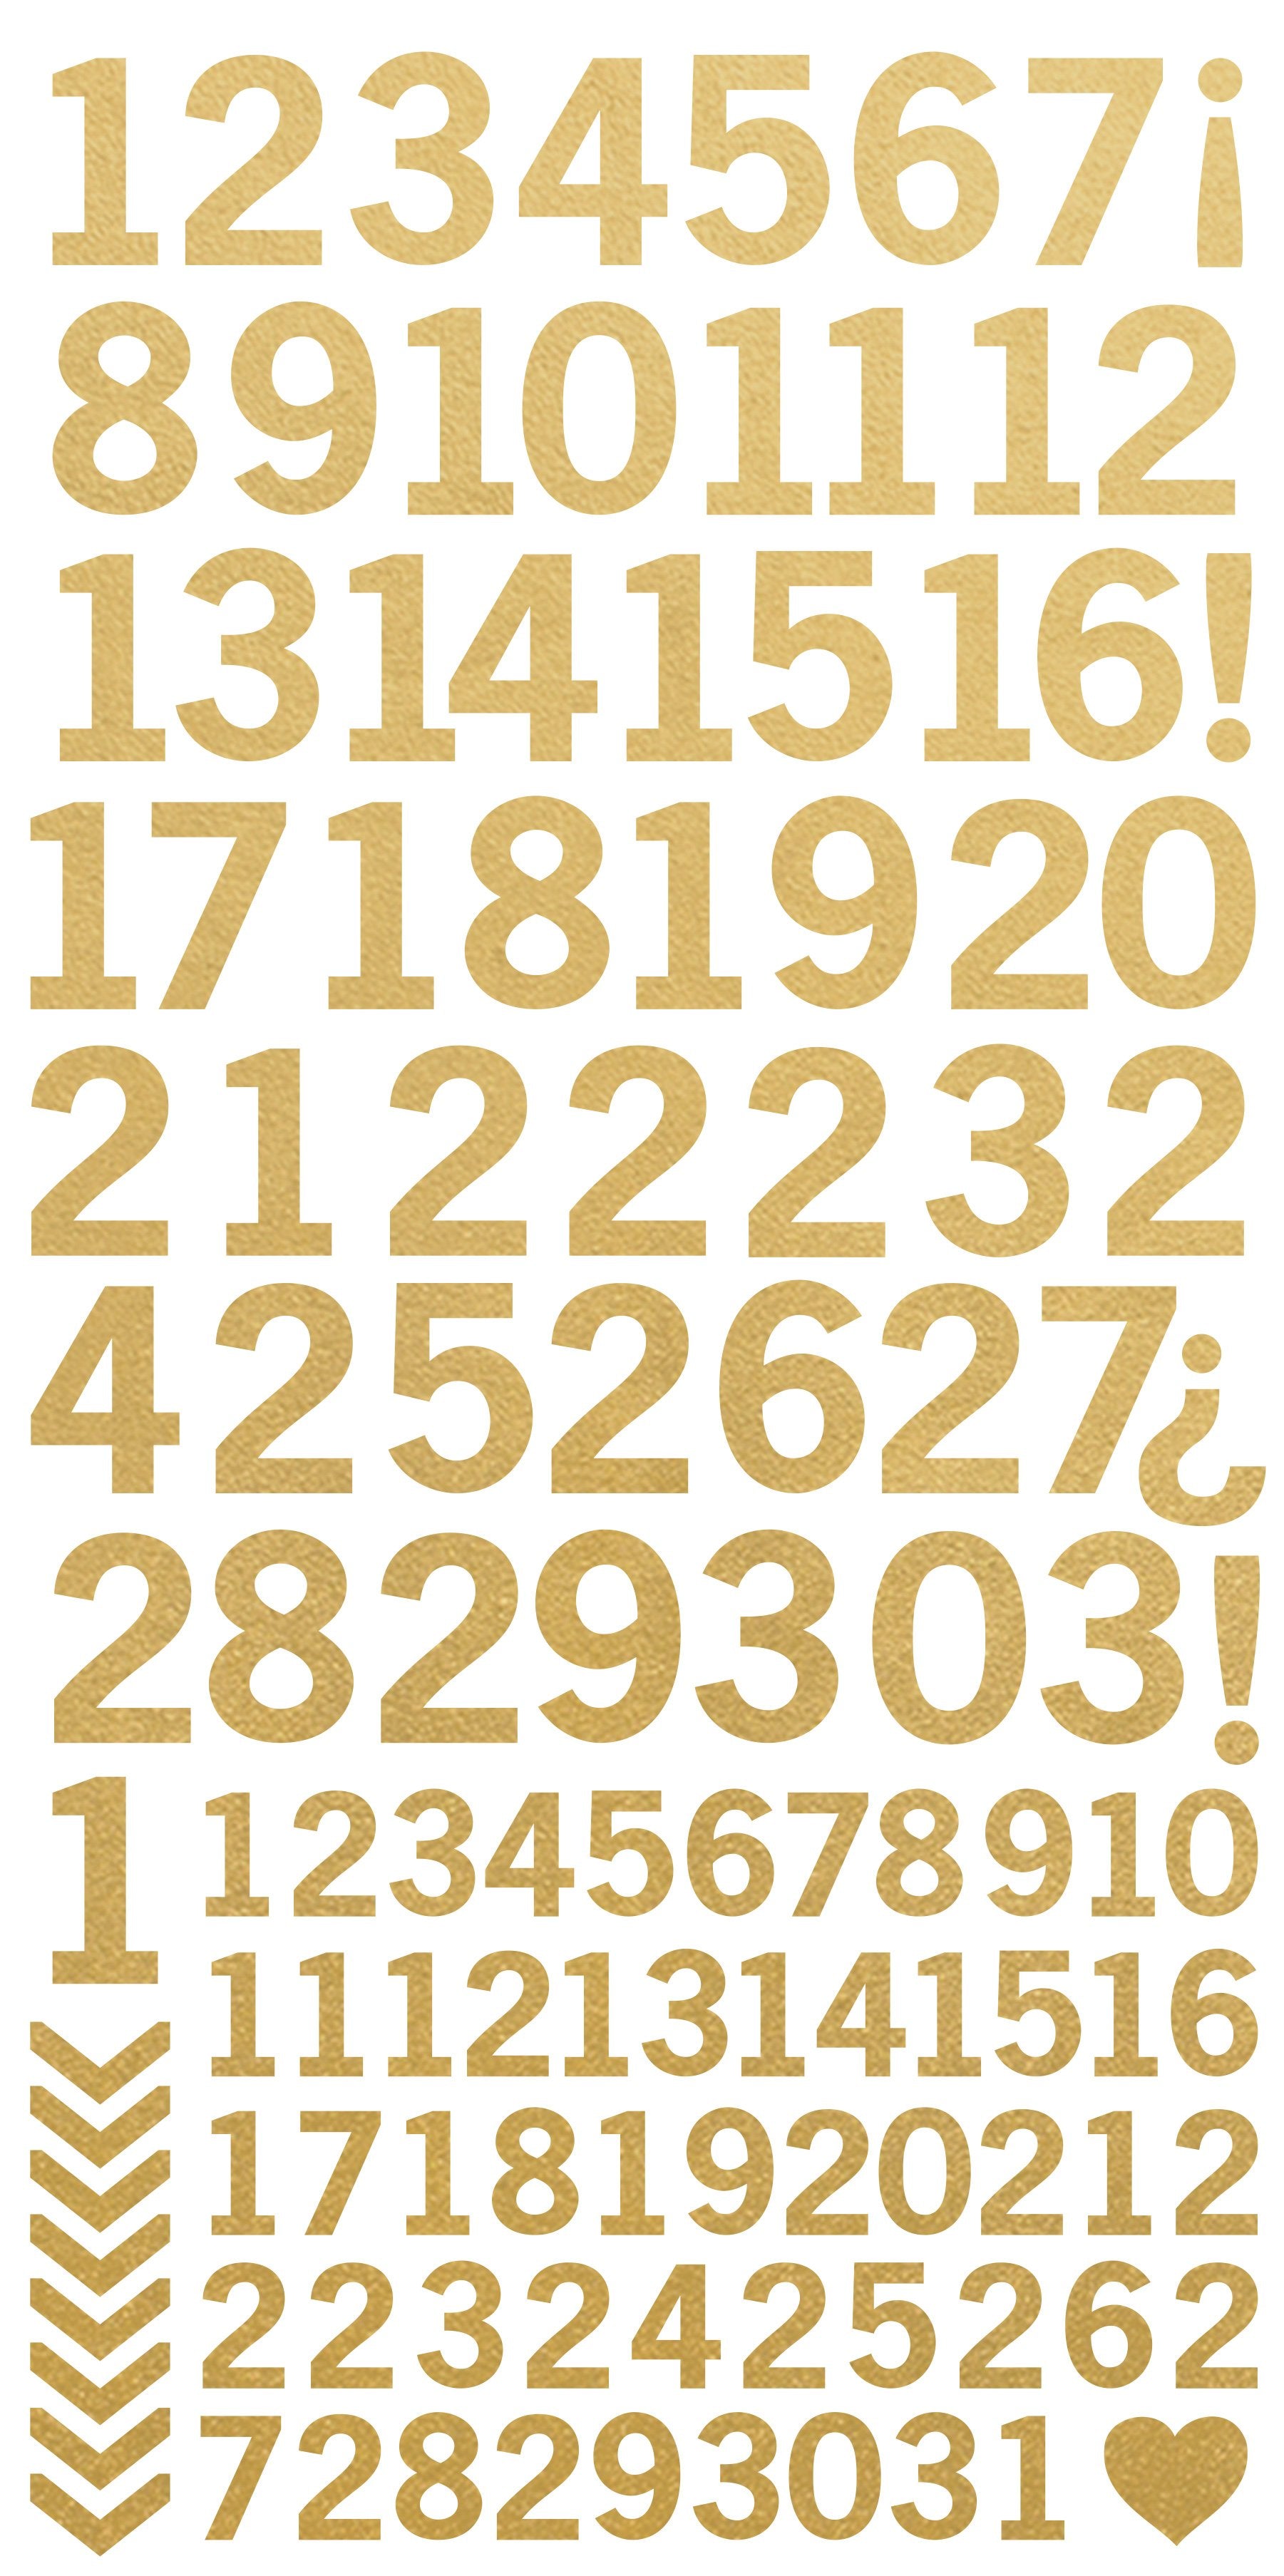 Number Stickers - Metallic Gold